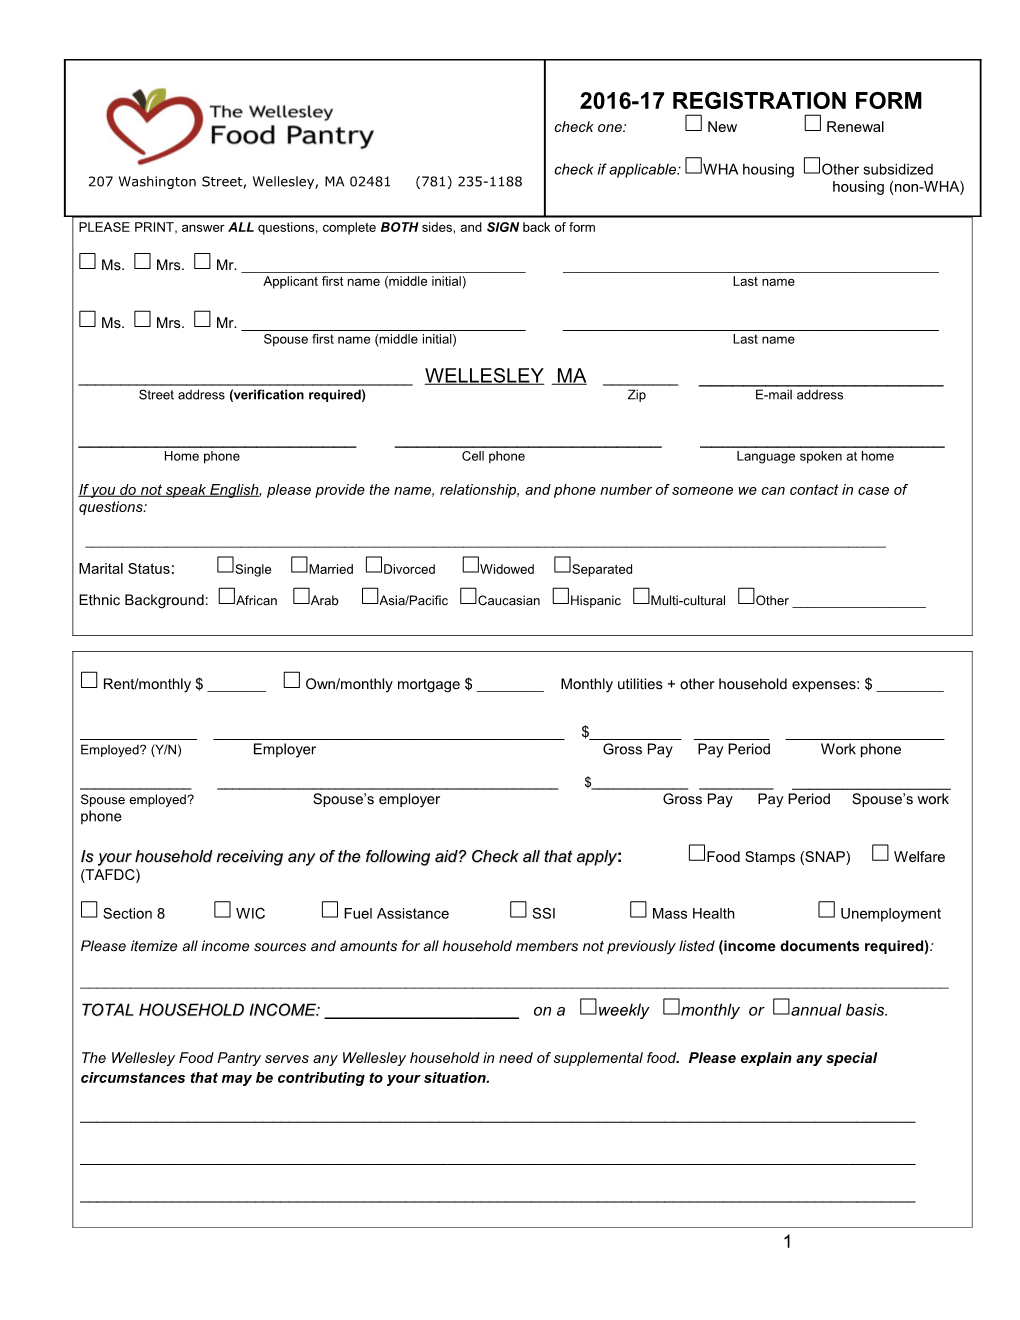 PLEASE PRINT, Answer ALL Questions, Completeboth Sides, and SIGN Back of Form